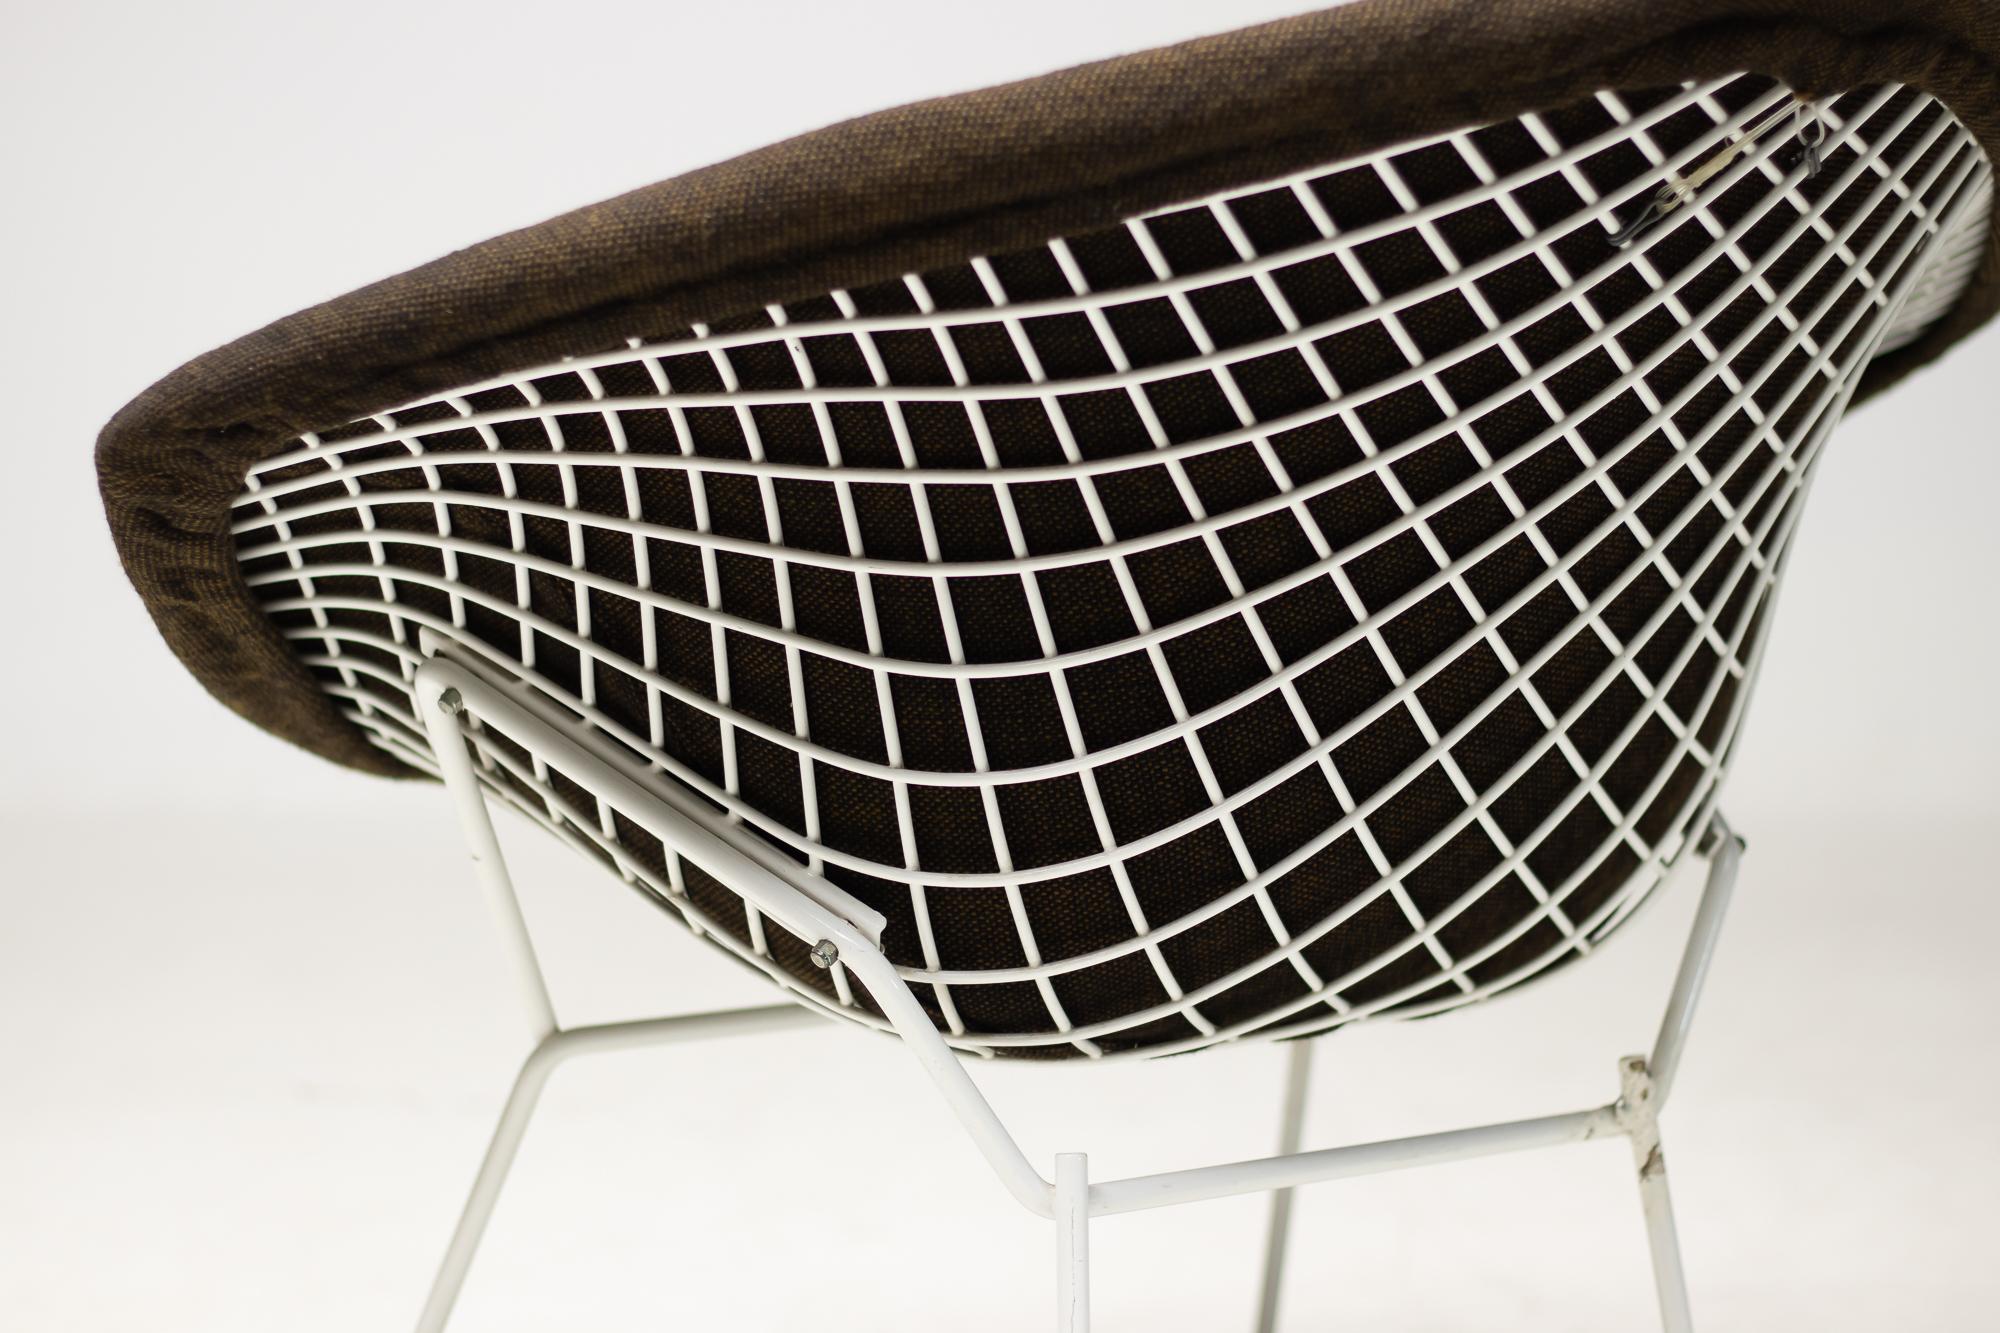 Enameled White Diamond Chair by Harry Bertoia for Knoll